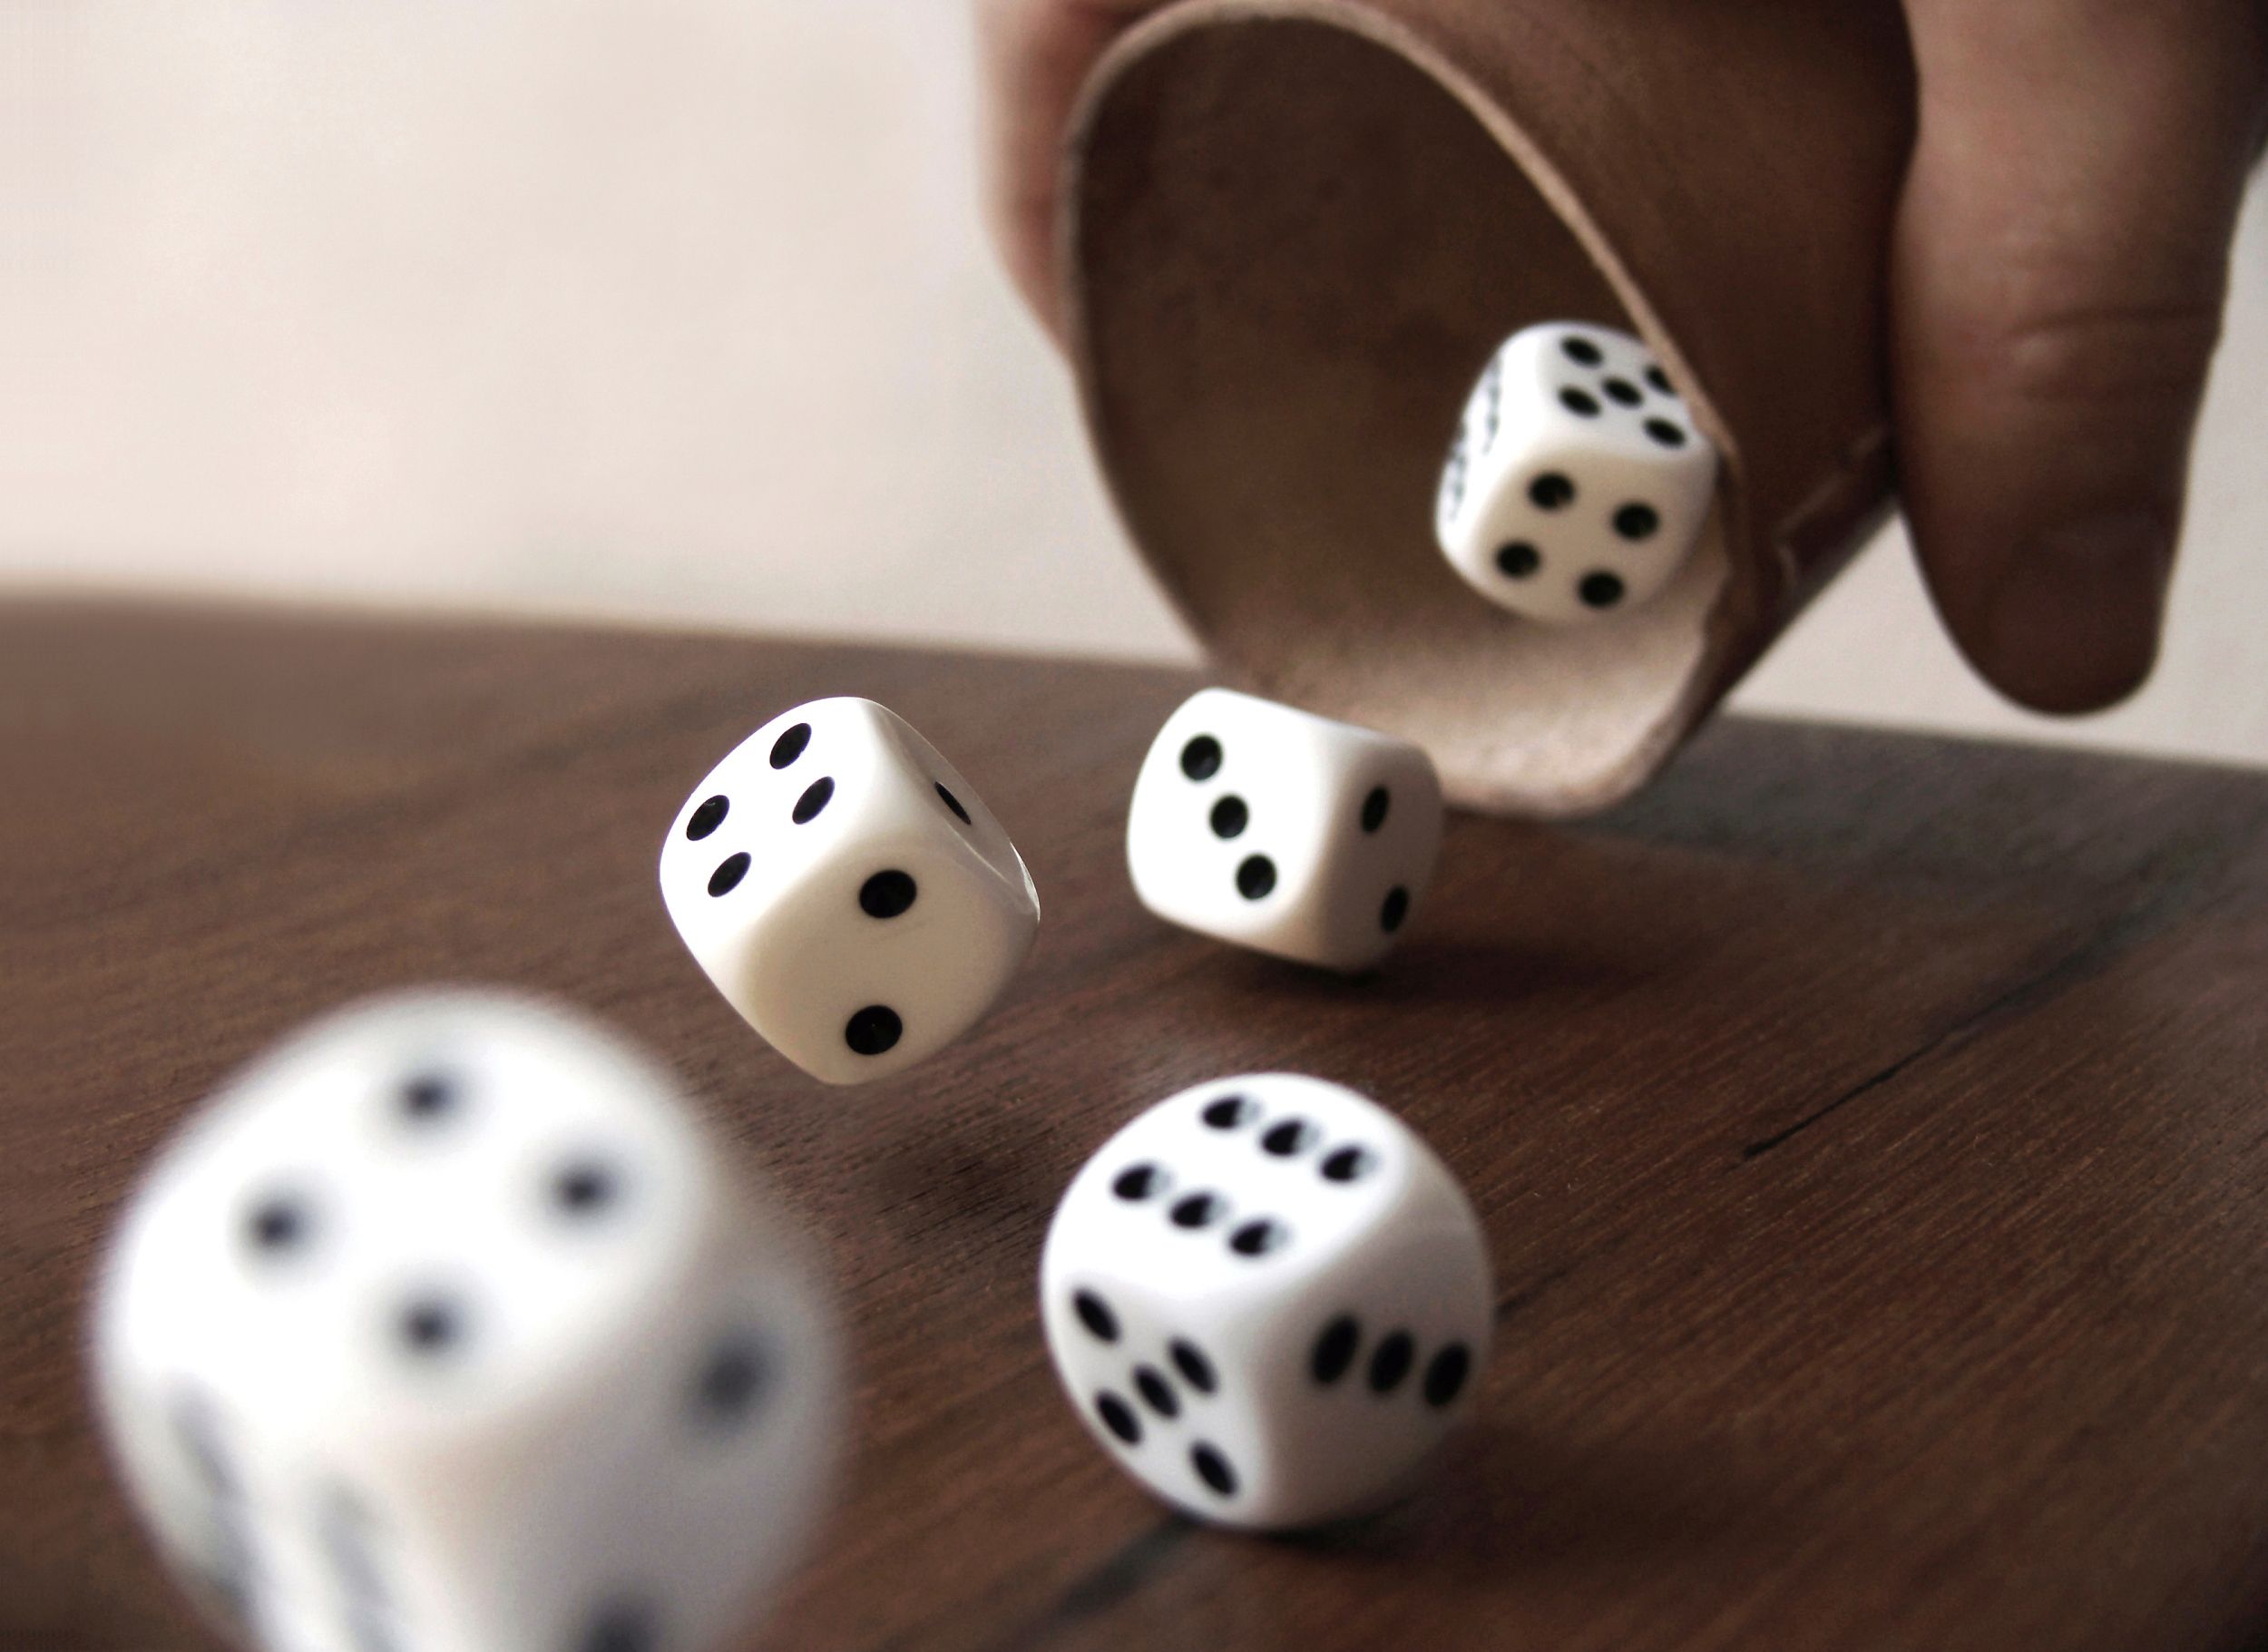 19-facts-about-dice